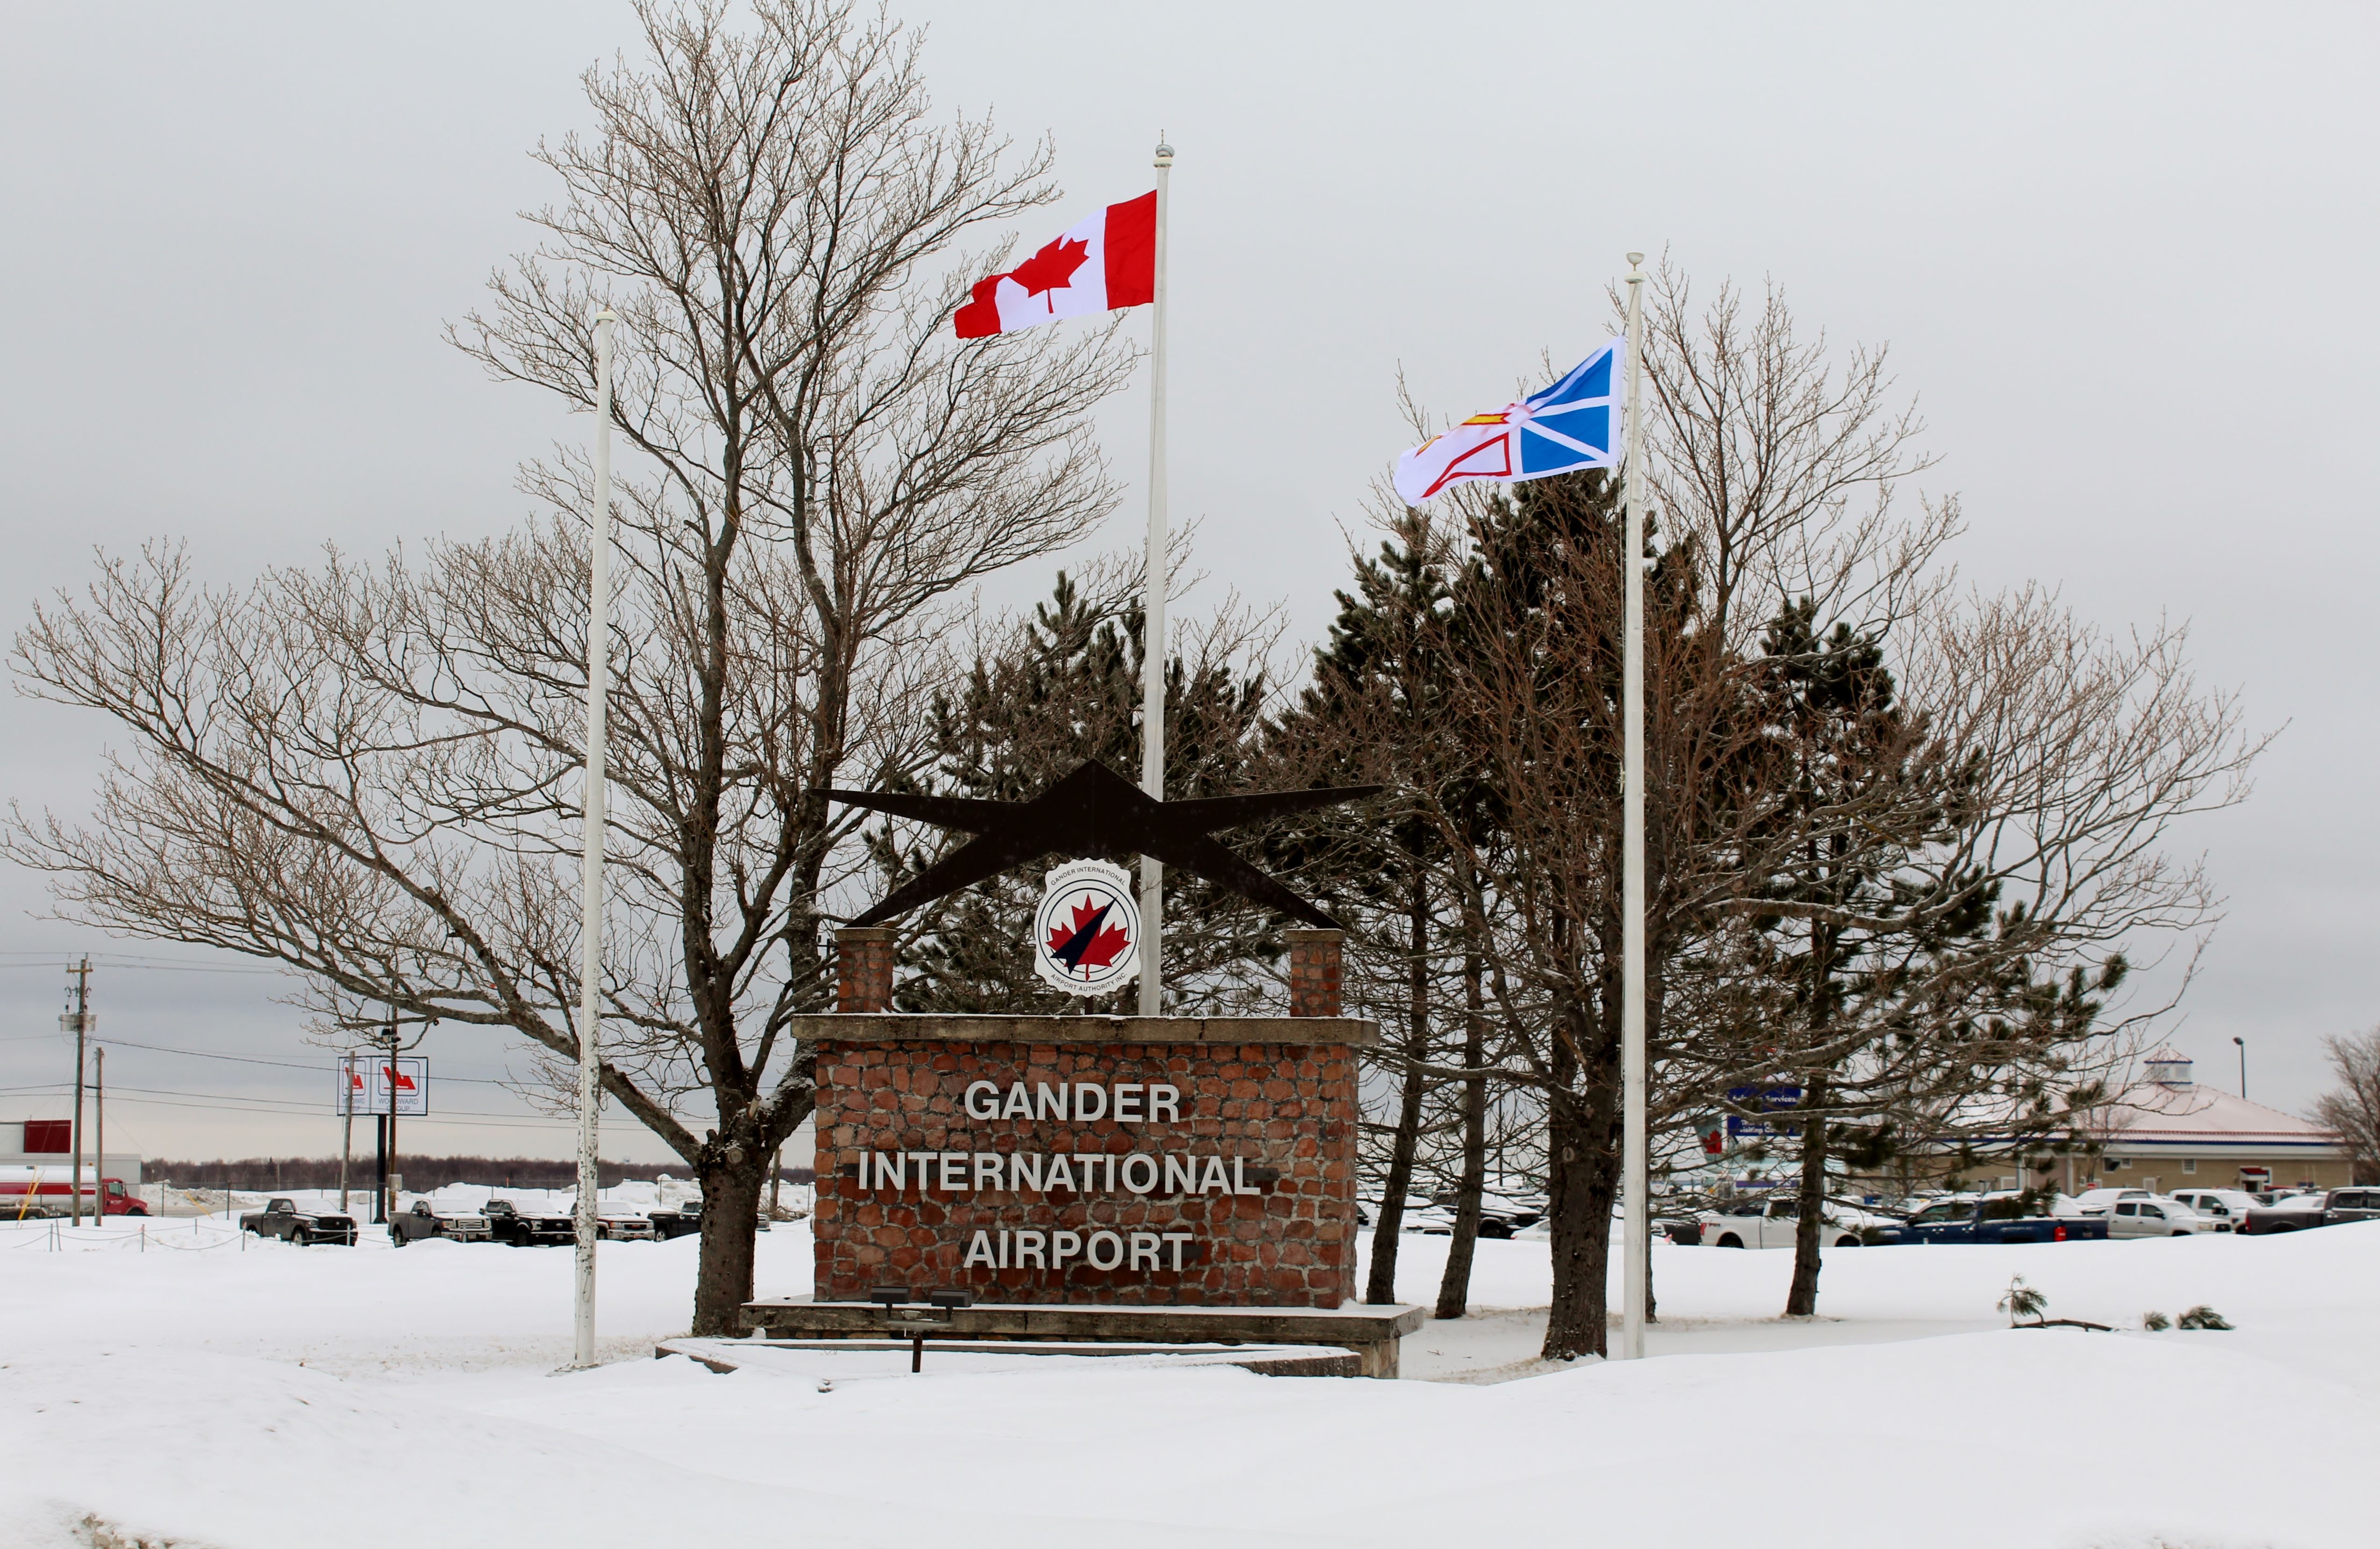 The sign outside Gander International Airport in Canada.